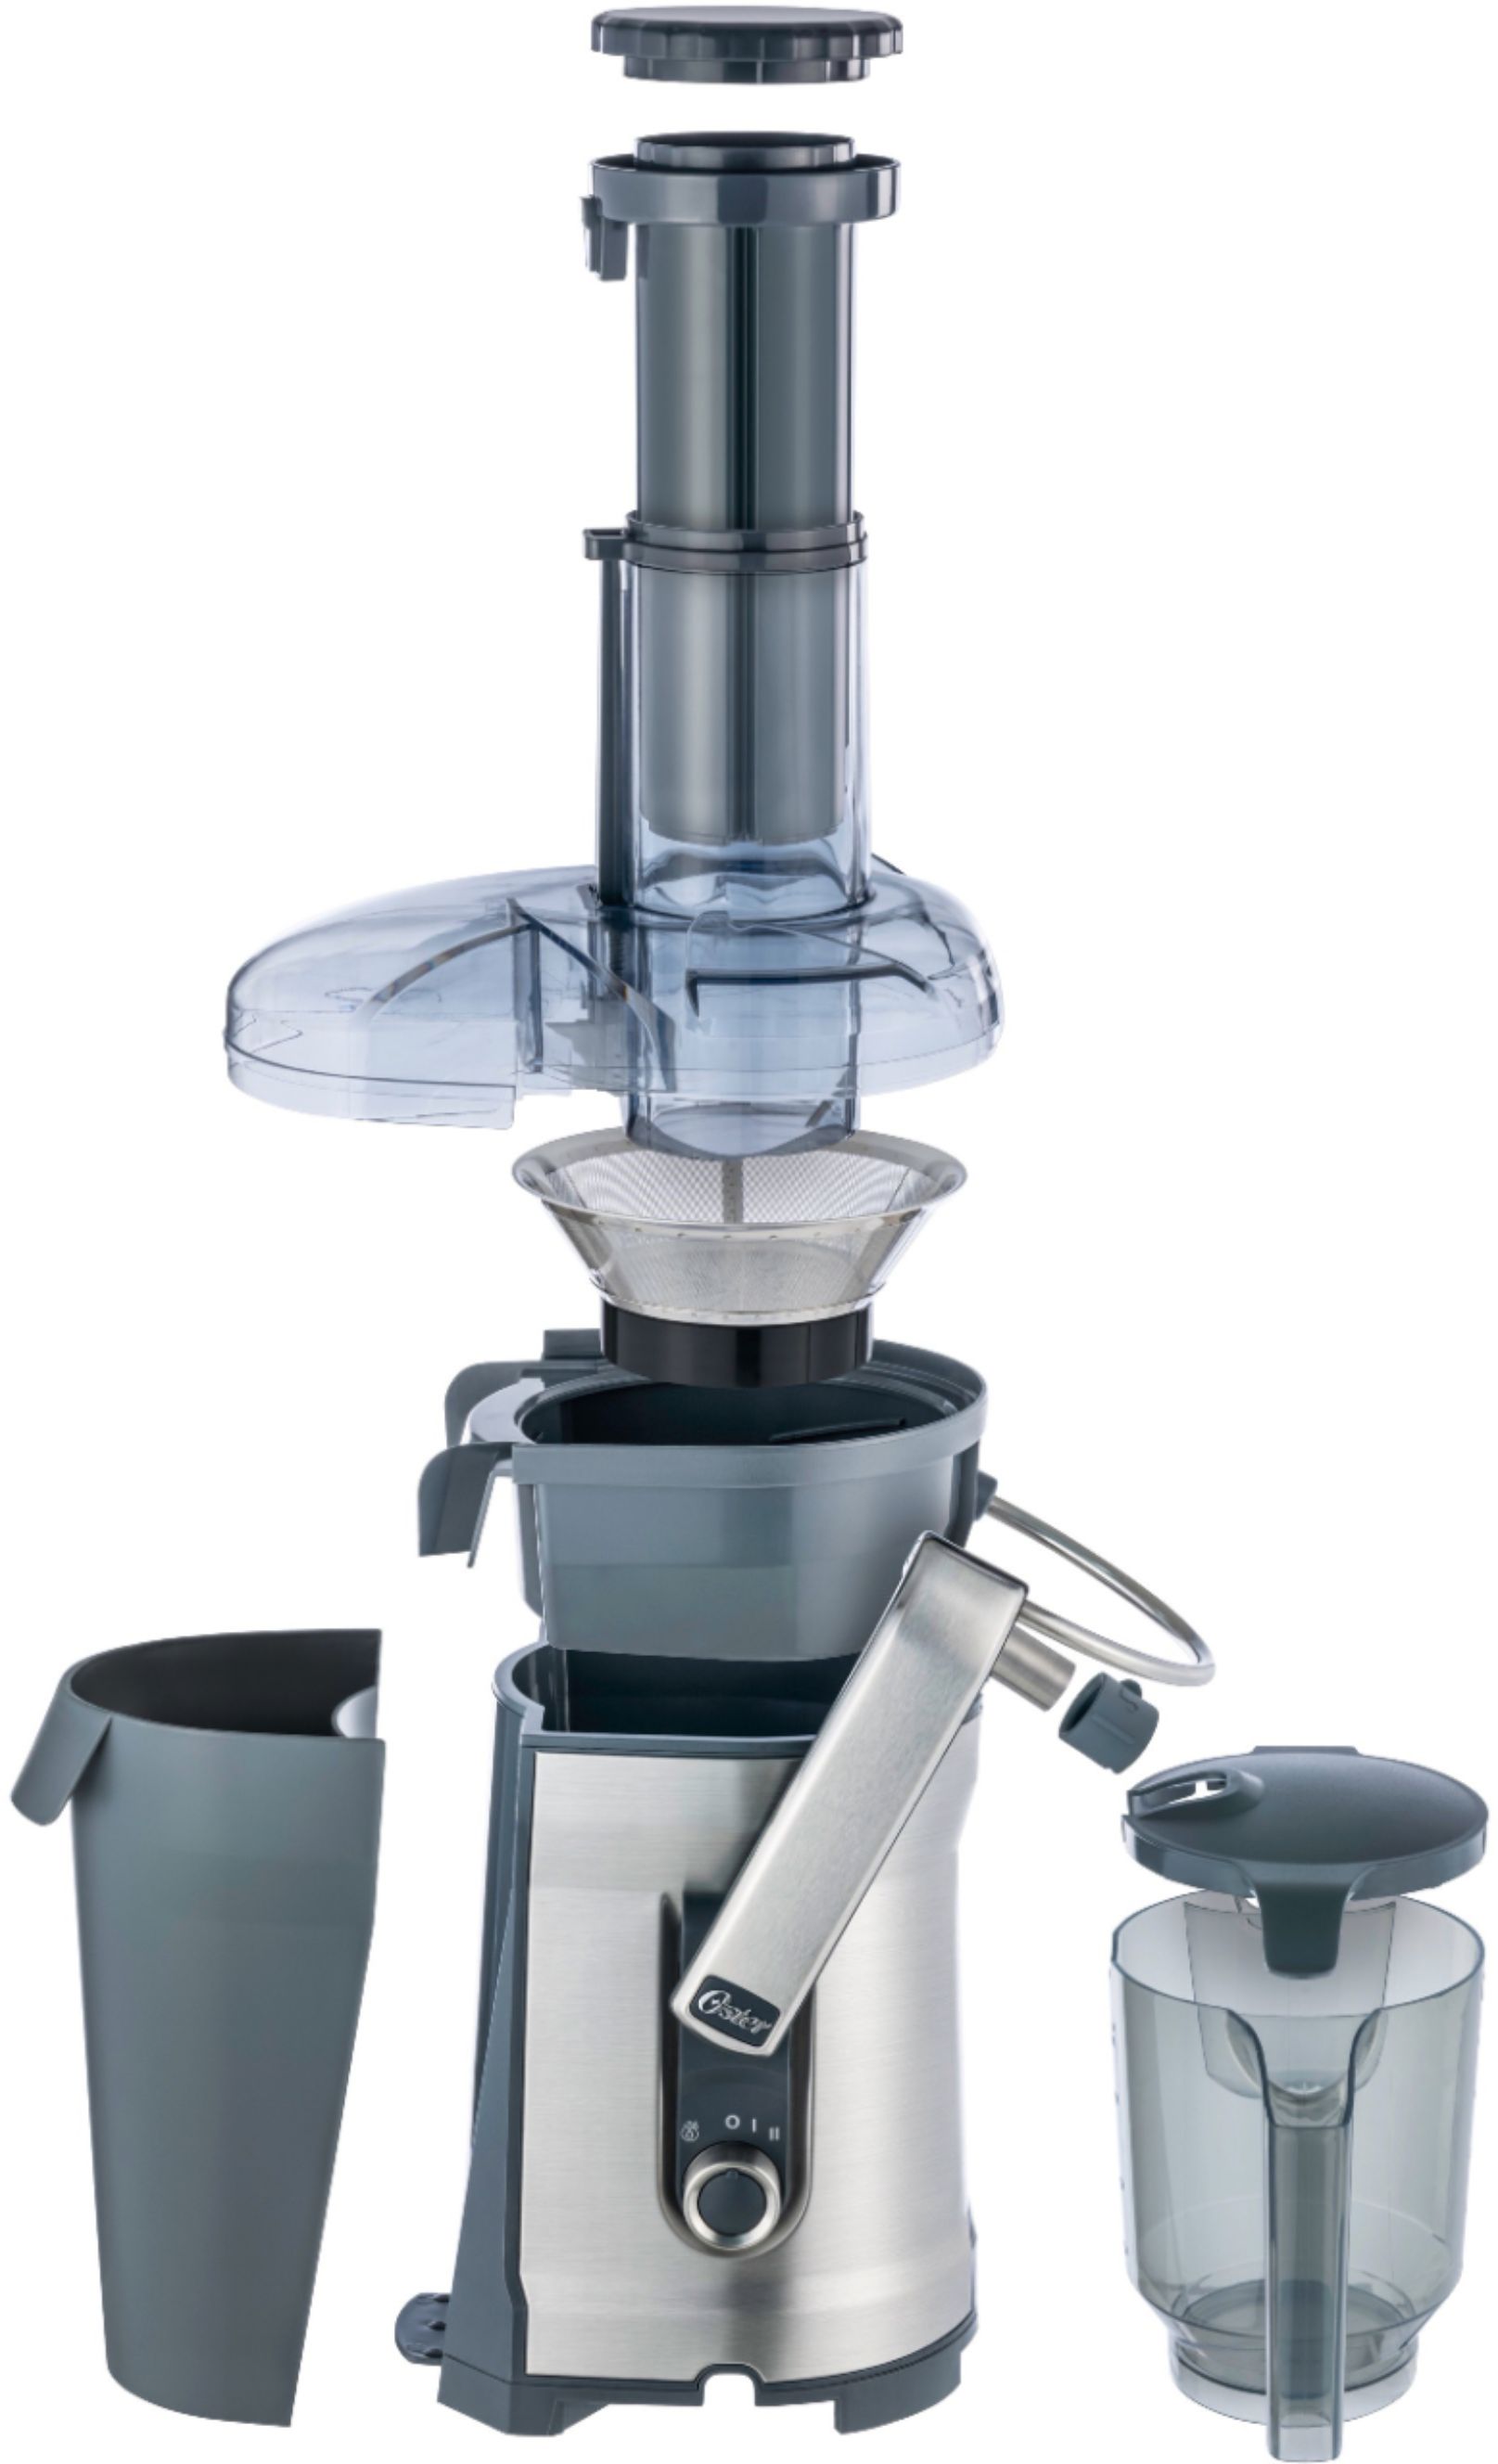 Angle View: Oster - Self-Cleaning Professional Juice Extractor, Stainless Steel Juicer - Stainless Steel